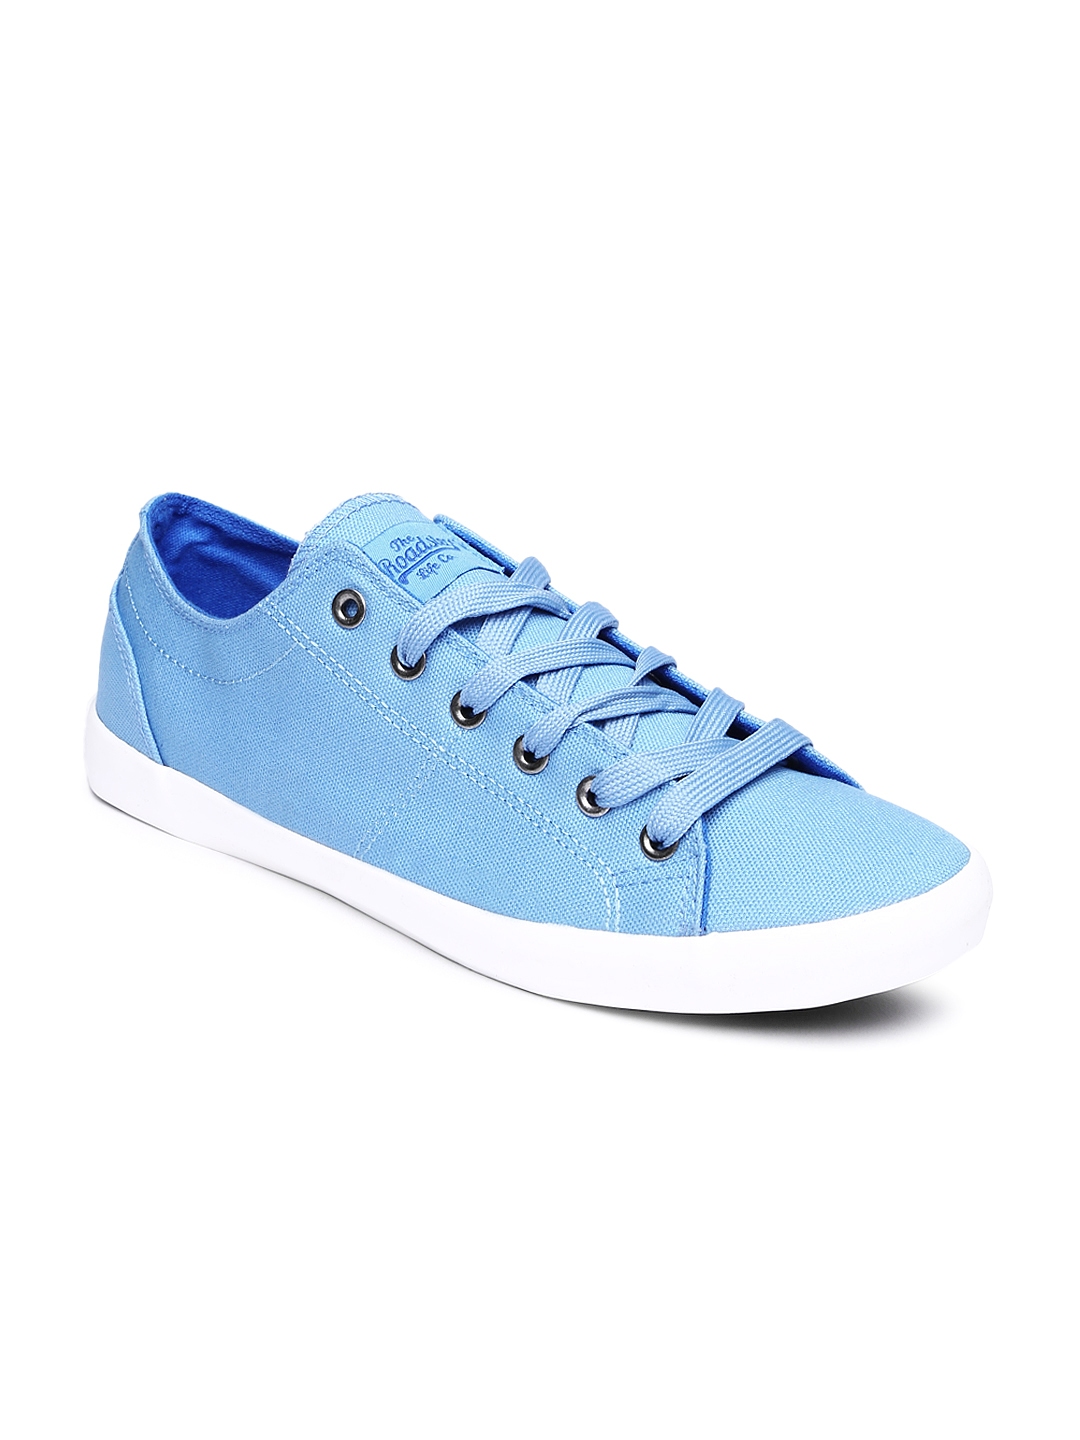 Buy Roadster Men Blue Casual Shoes - Casual Shoes for Men 733593 | Myntra